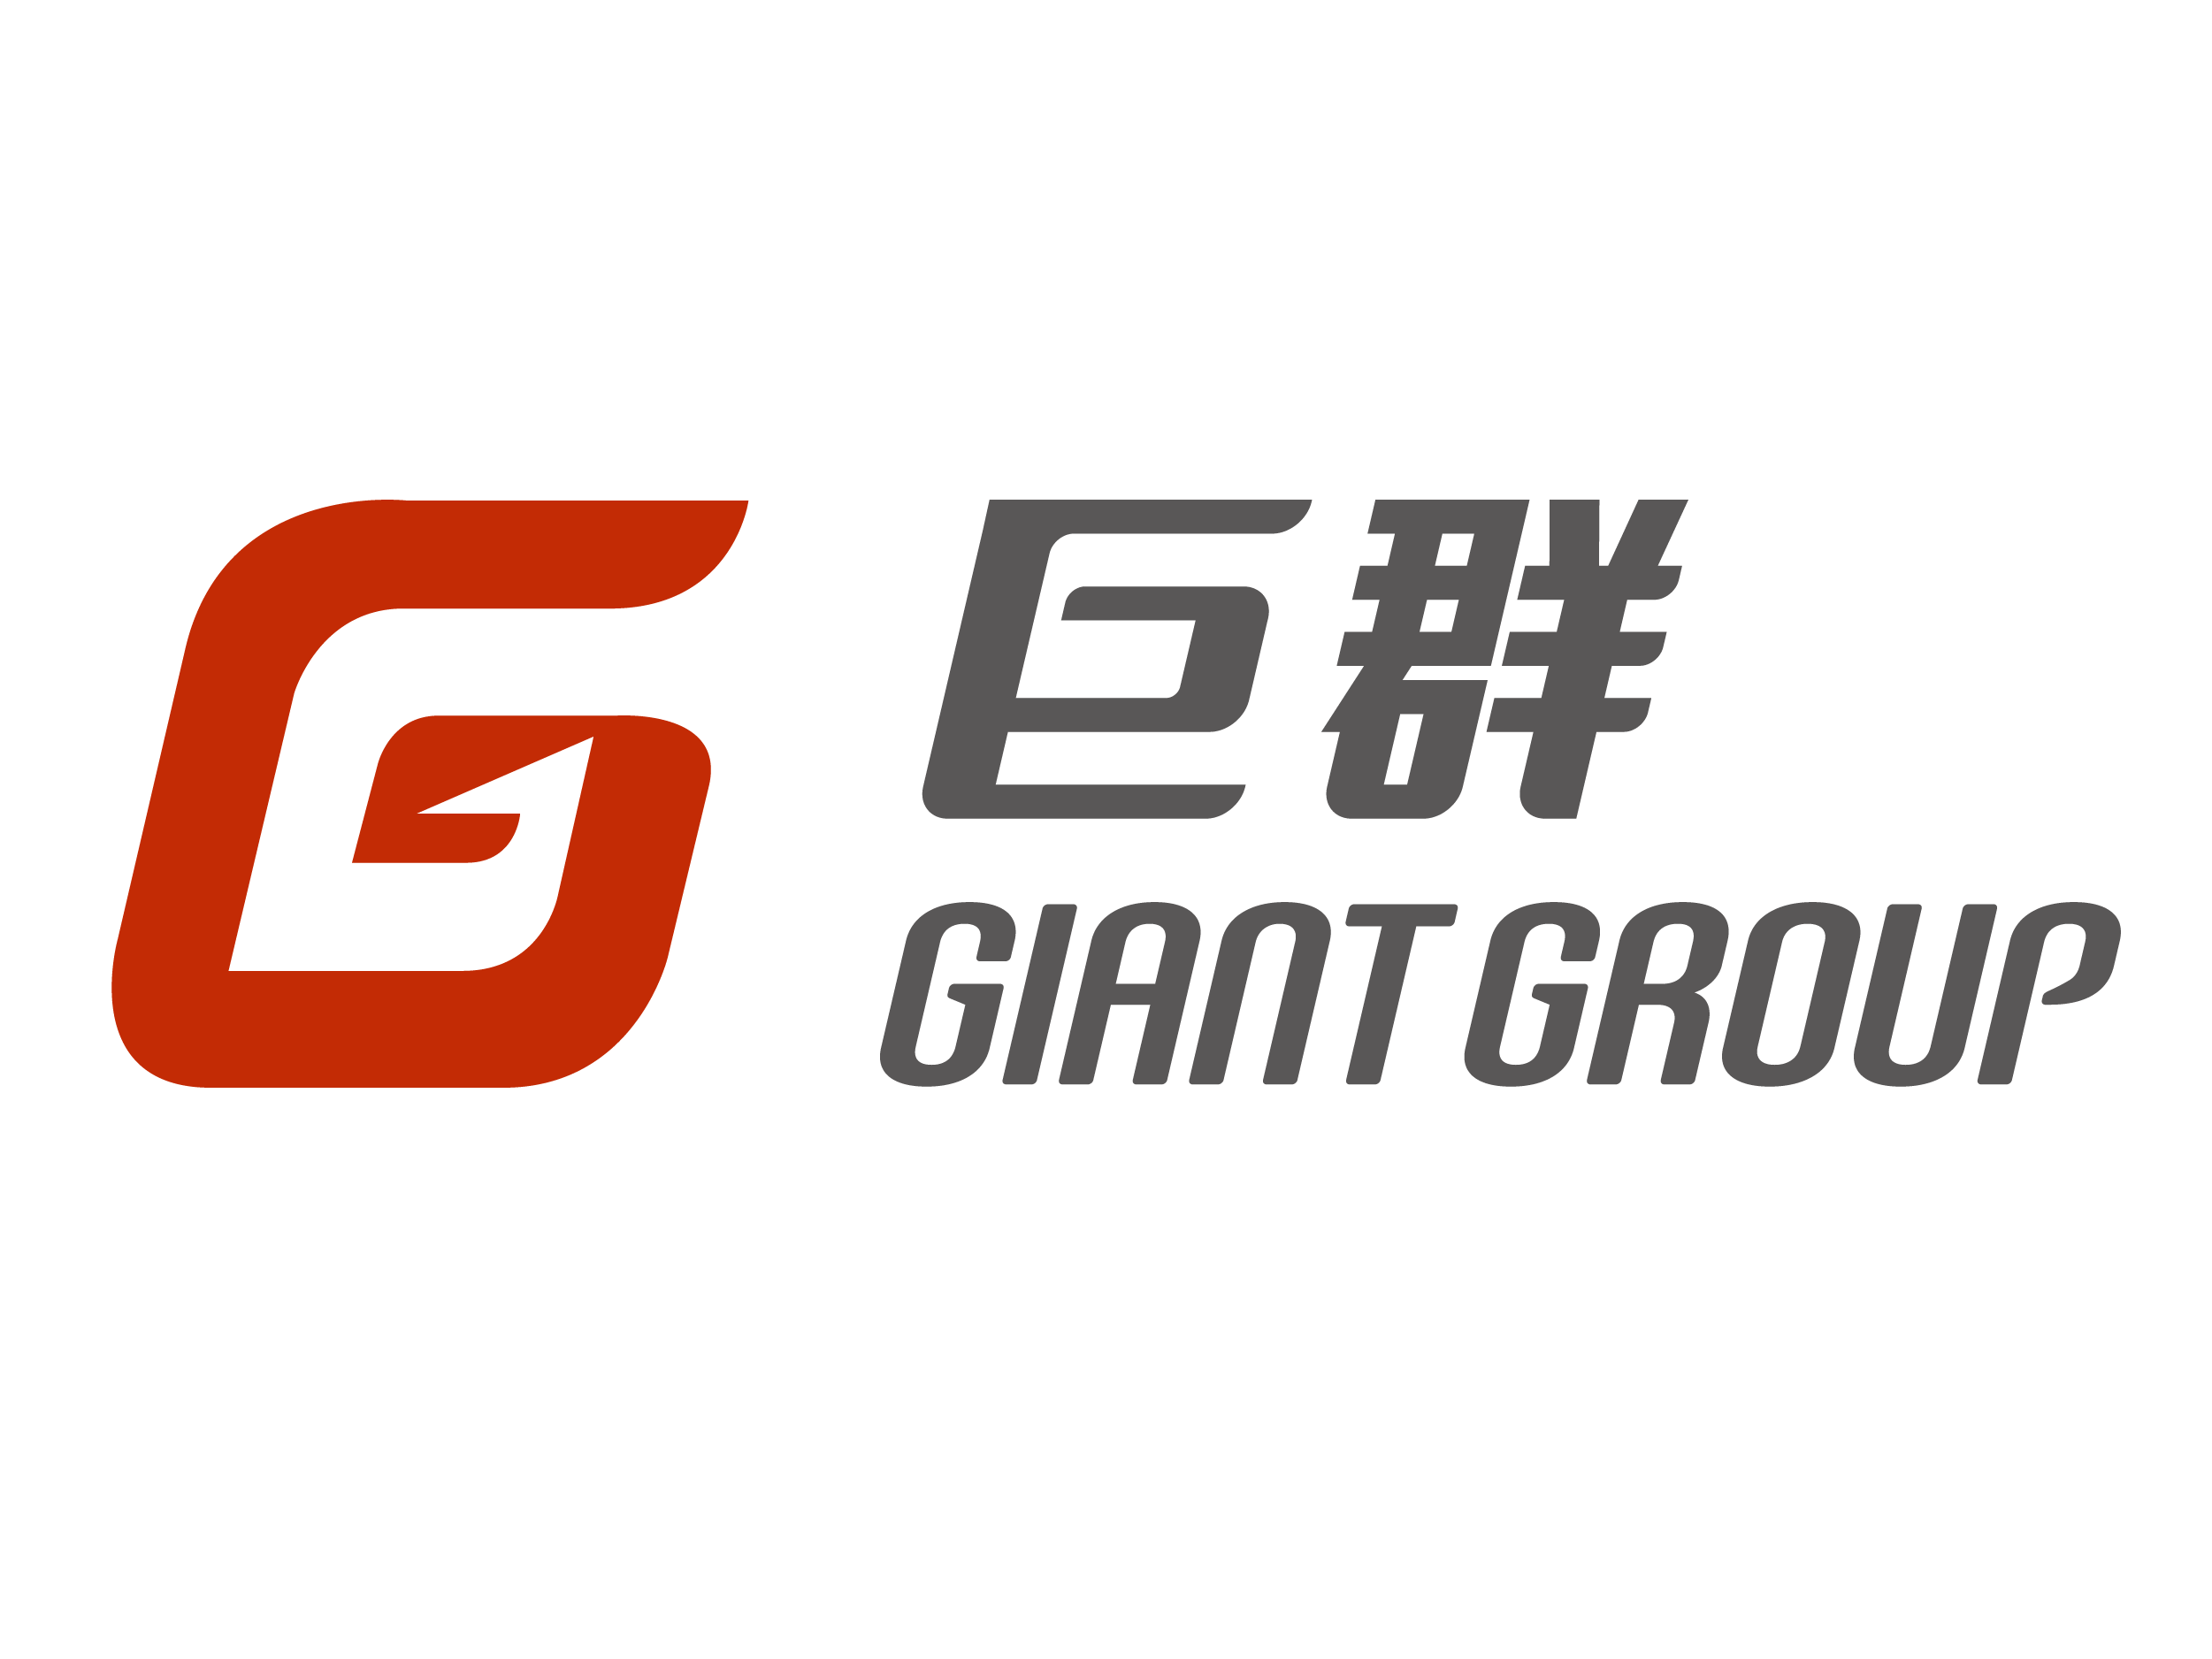 Giant Group Logo_1.png